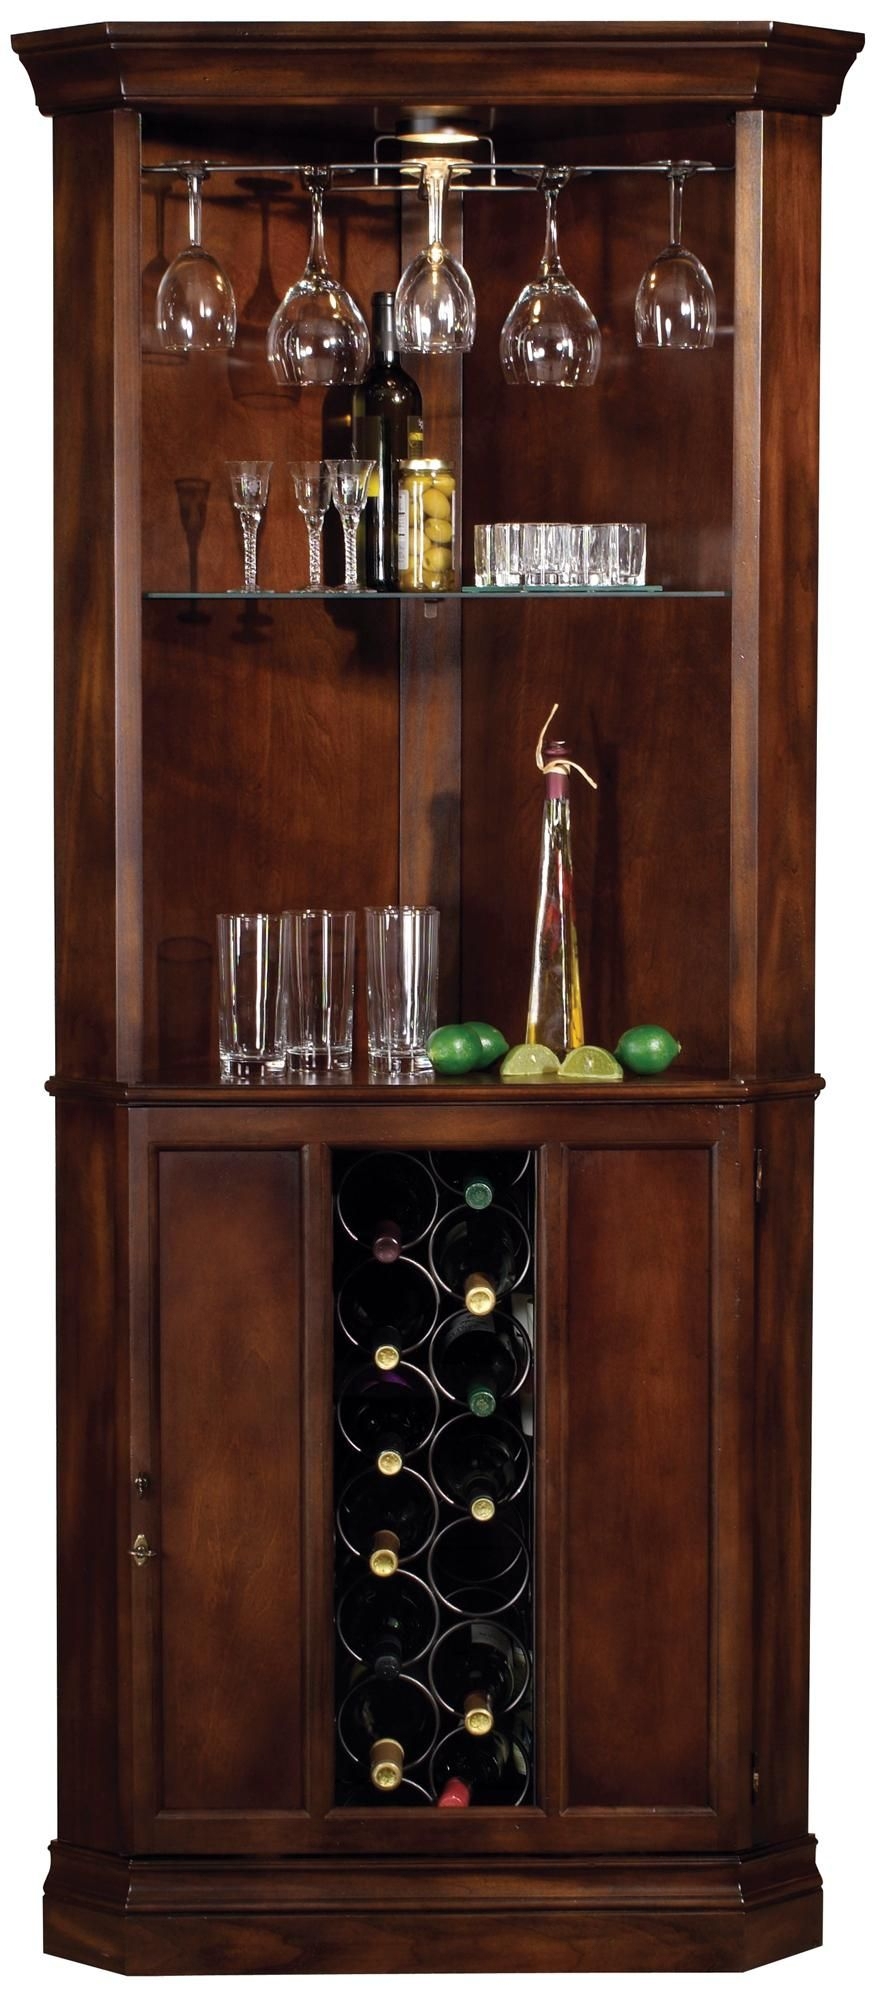 Howard Miller Piedmont Rustic Cherry Corner Bar Cabinet within sizing 877 X 2000